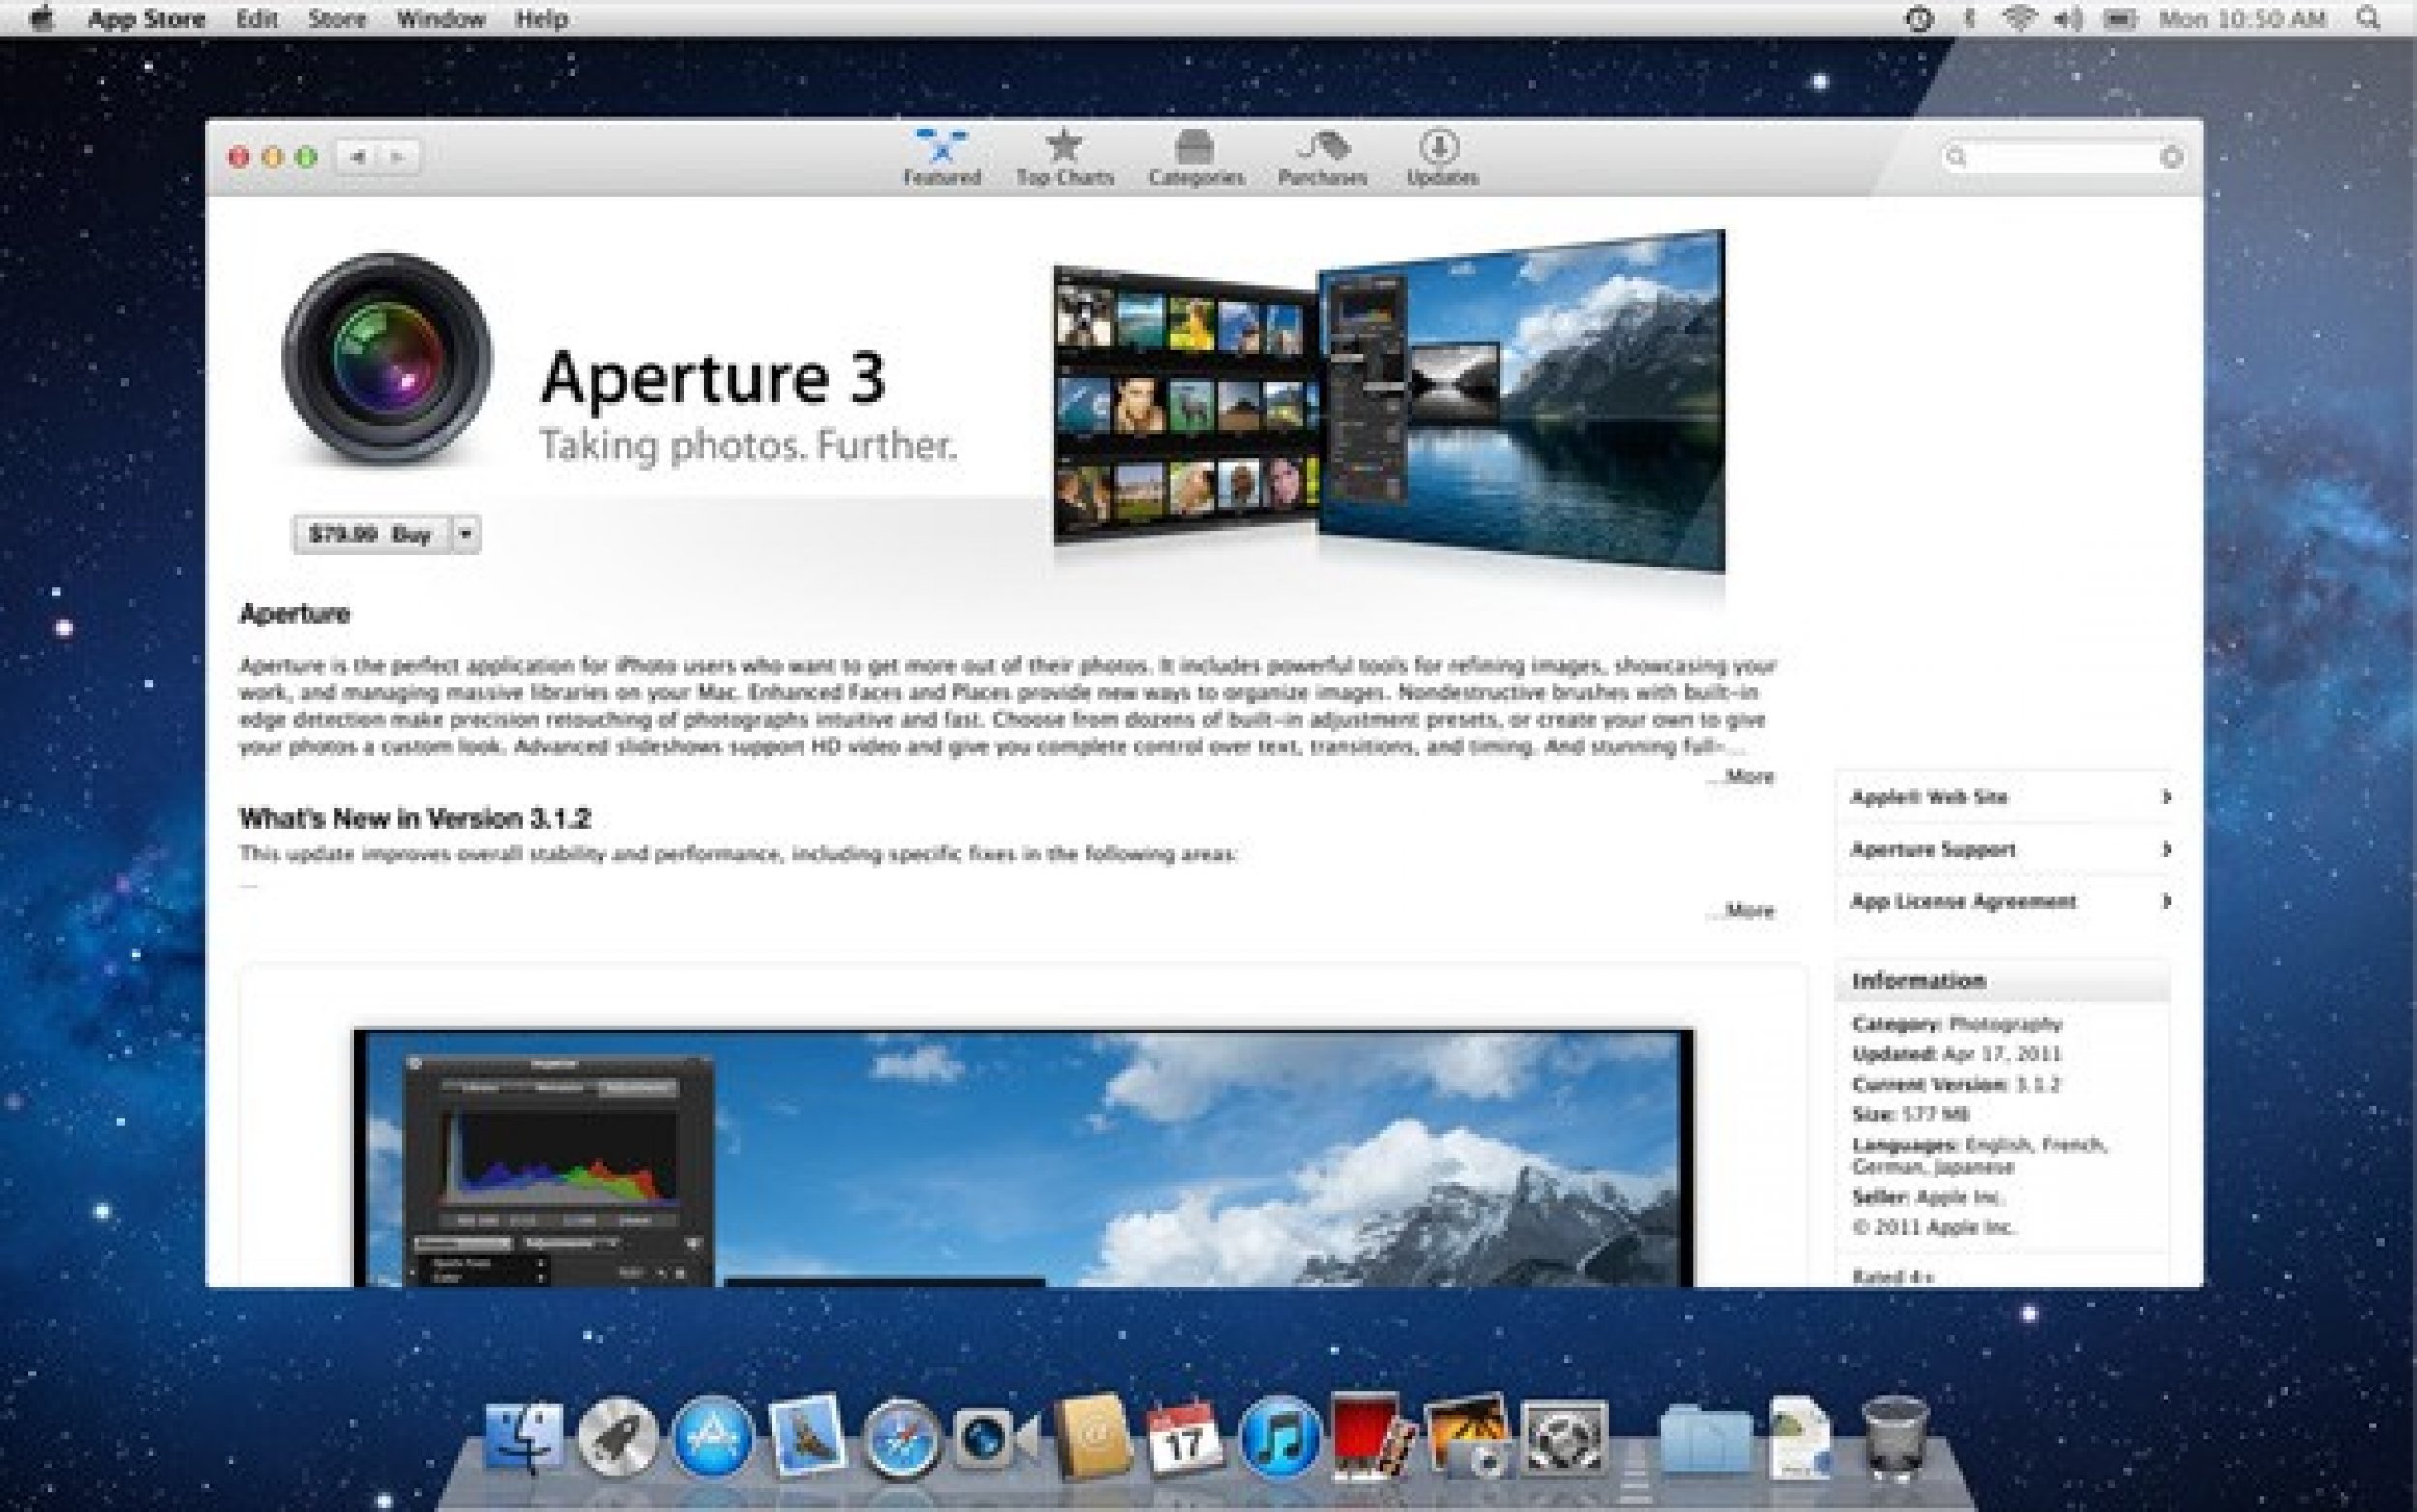 9. App Store Mac OS X Lion Is It Worth the Upgrade